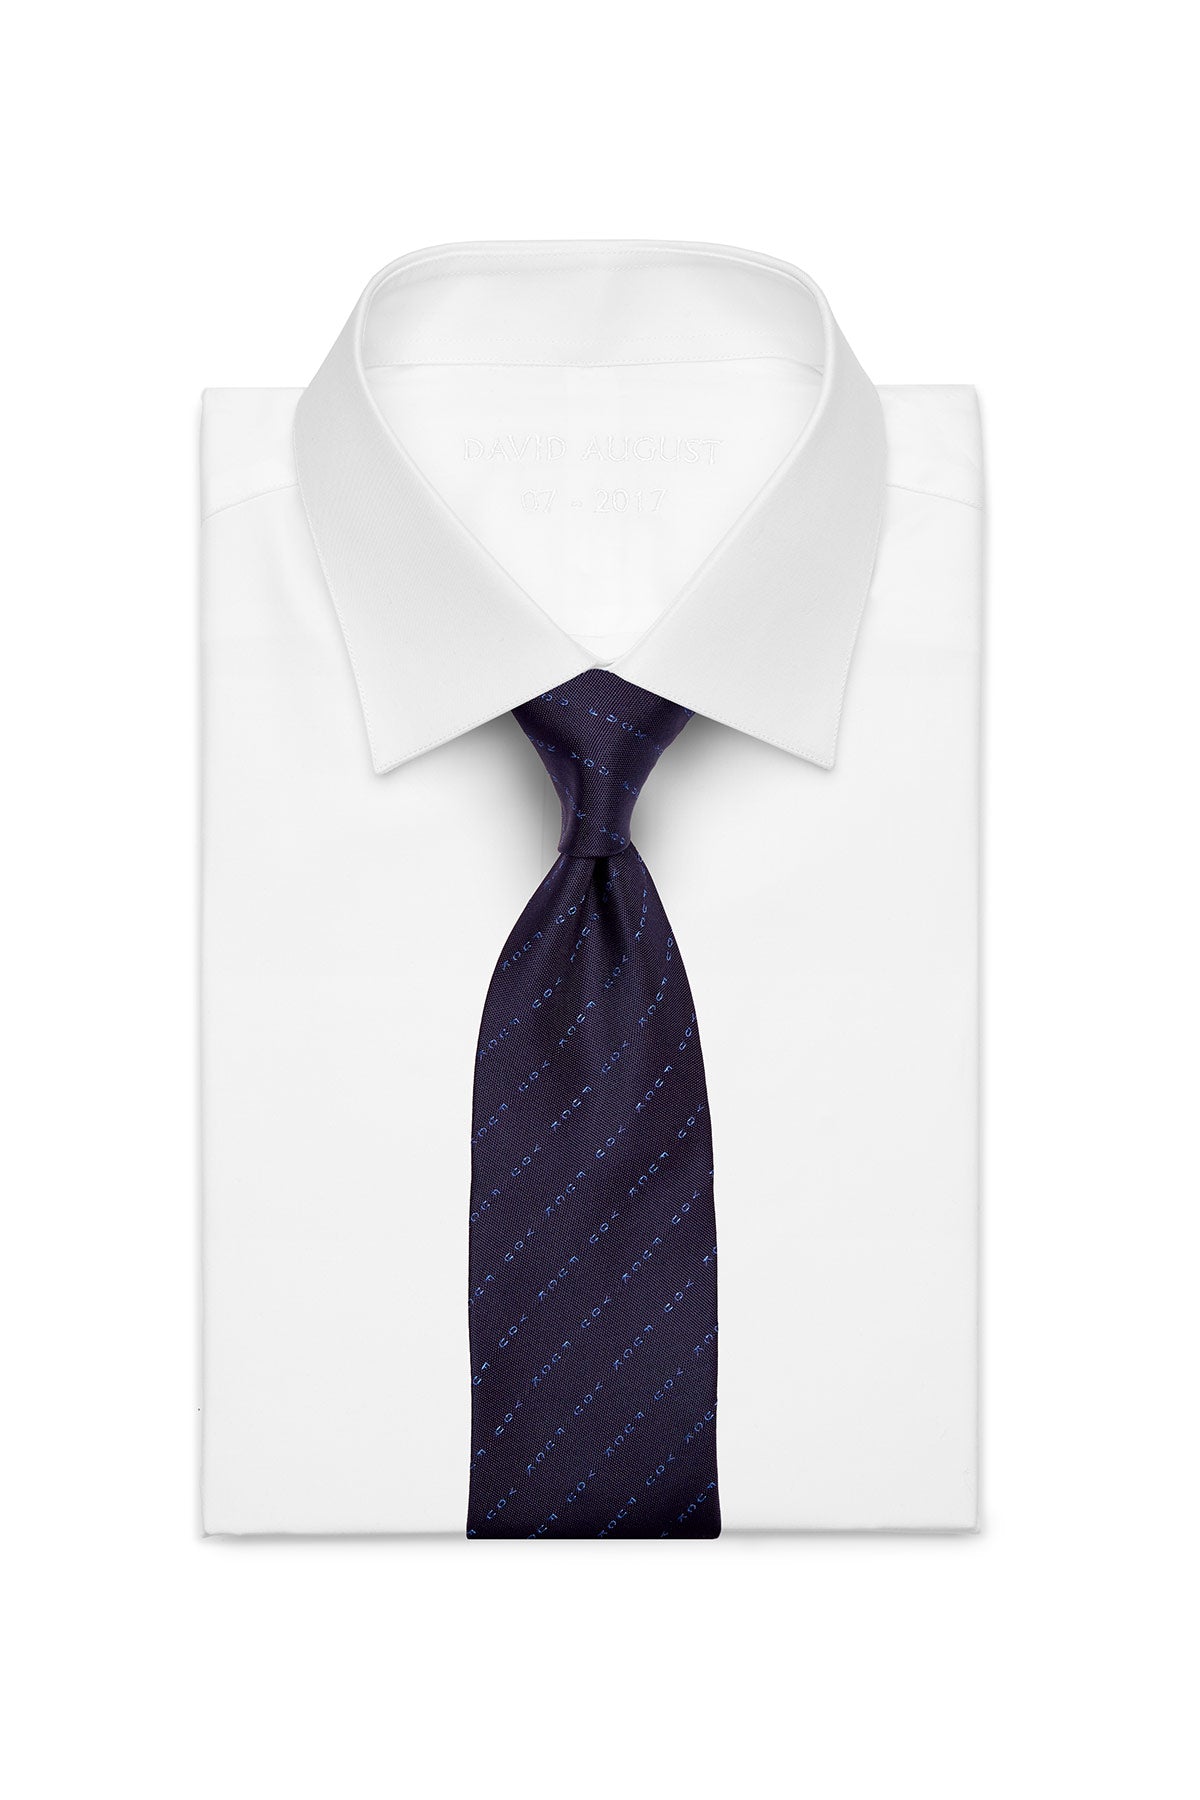 David August Exclusive Silk Woven Eff You Tie in Navy with Tonal Pinst ...